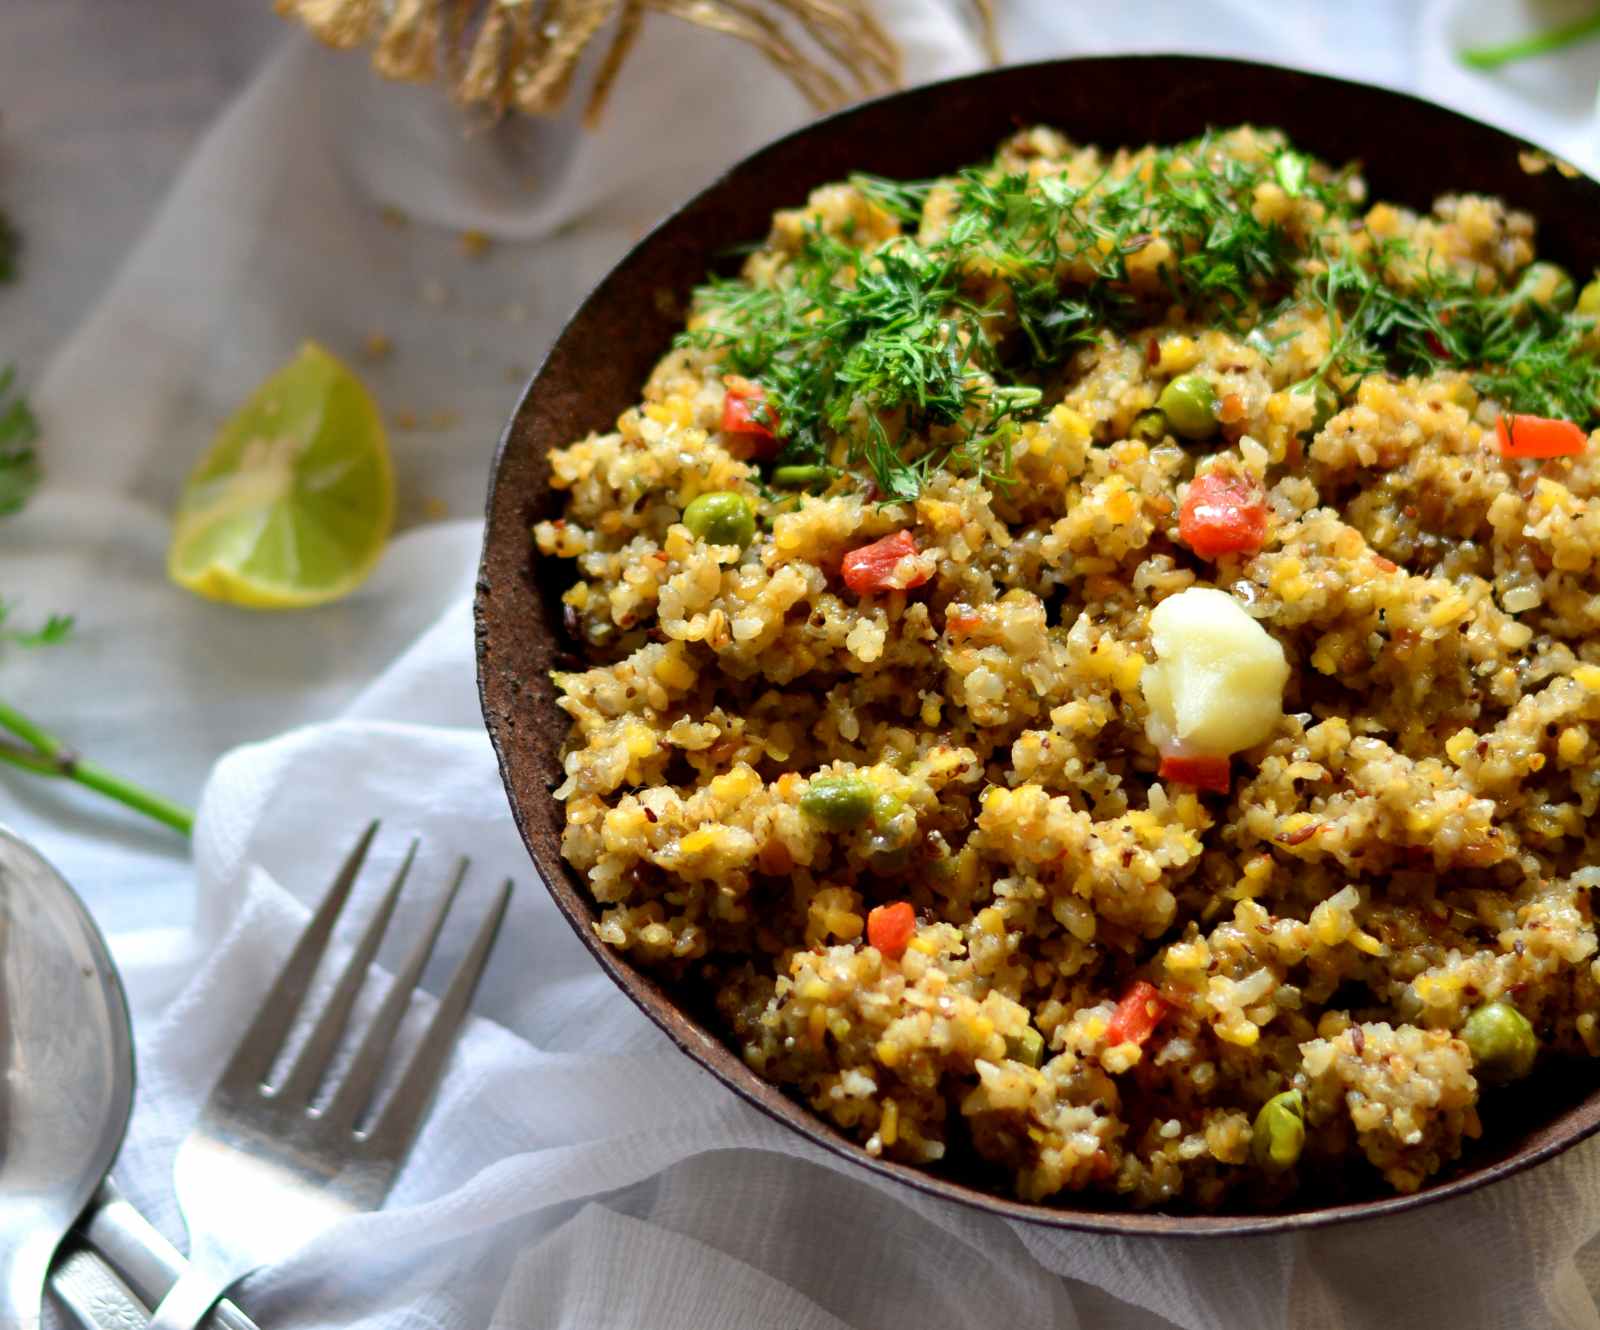 Broken Wheat and Mixed Millet Upma Recipe by Archana's Kitchen